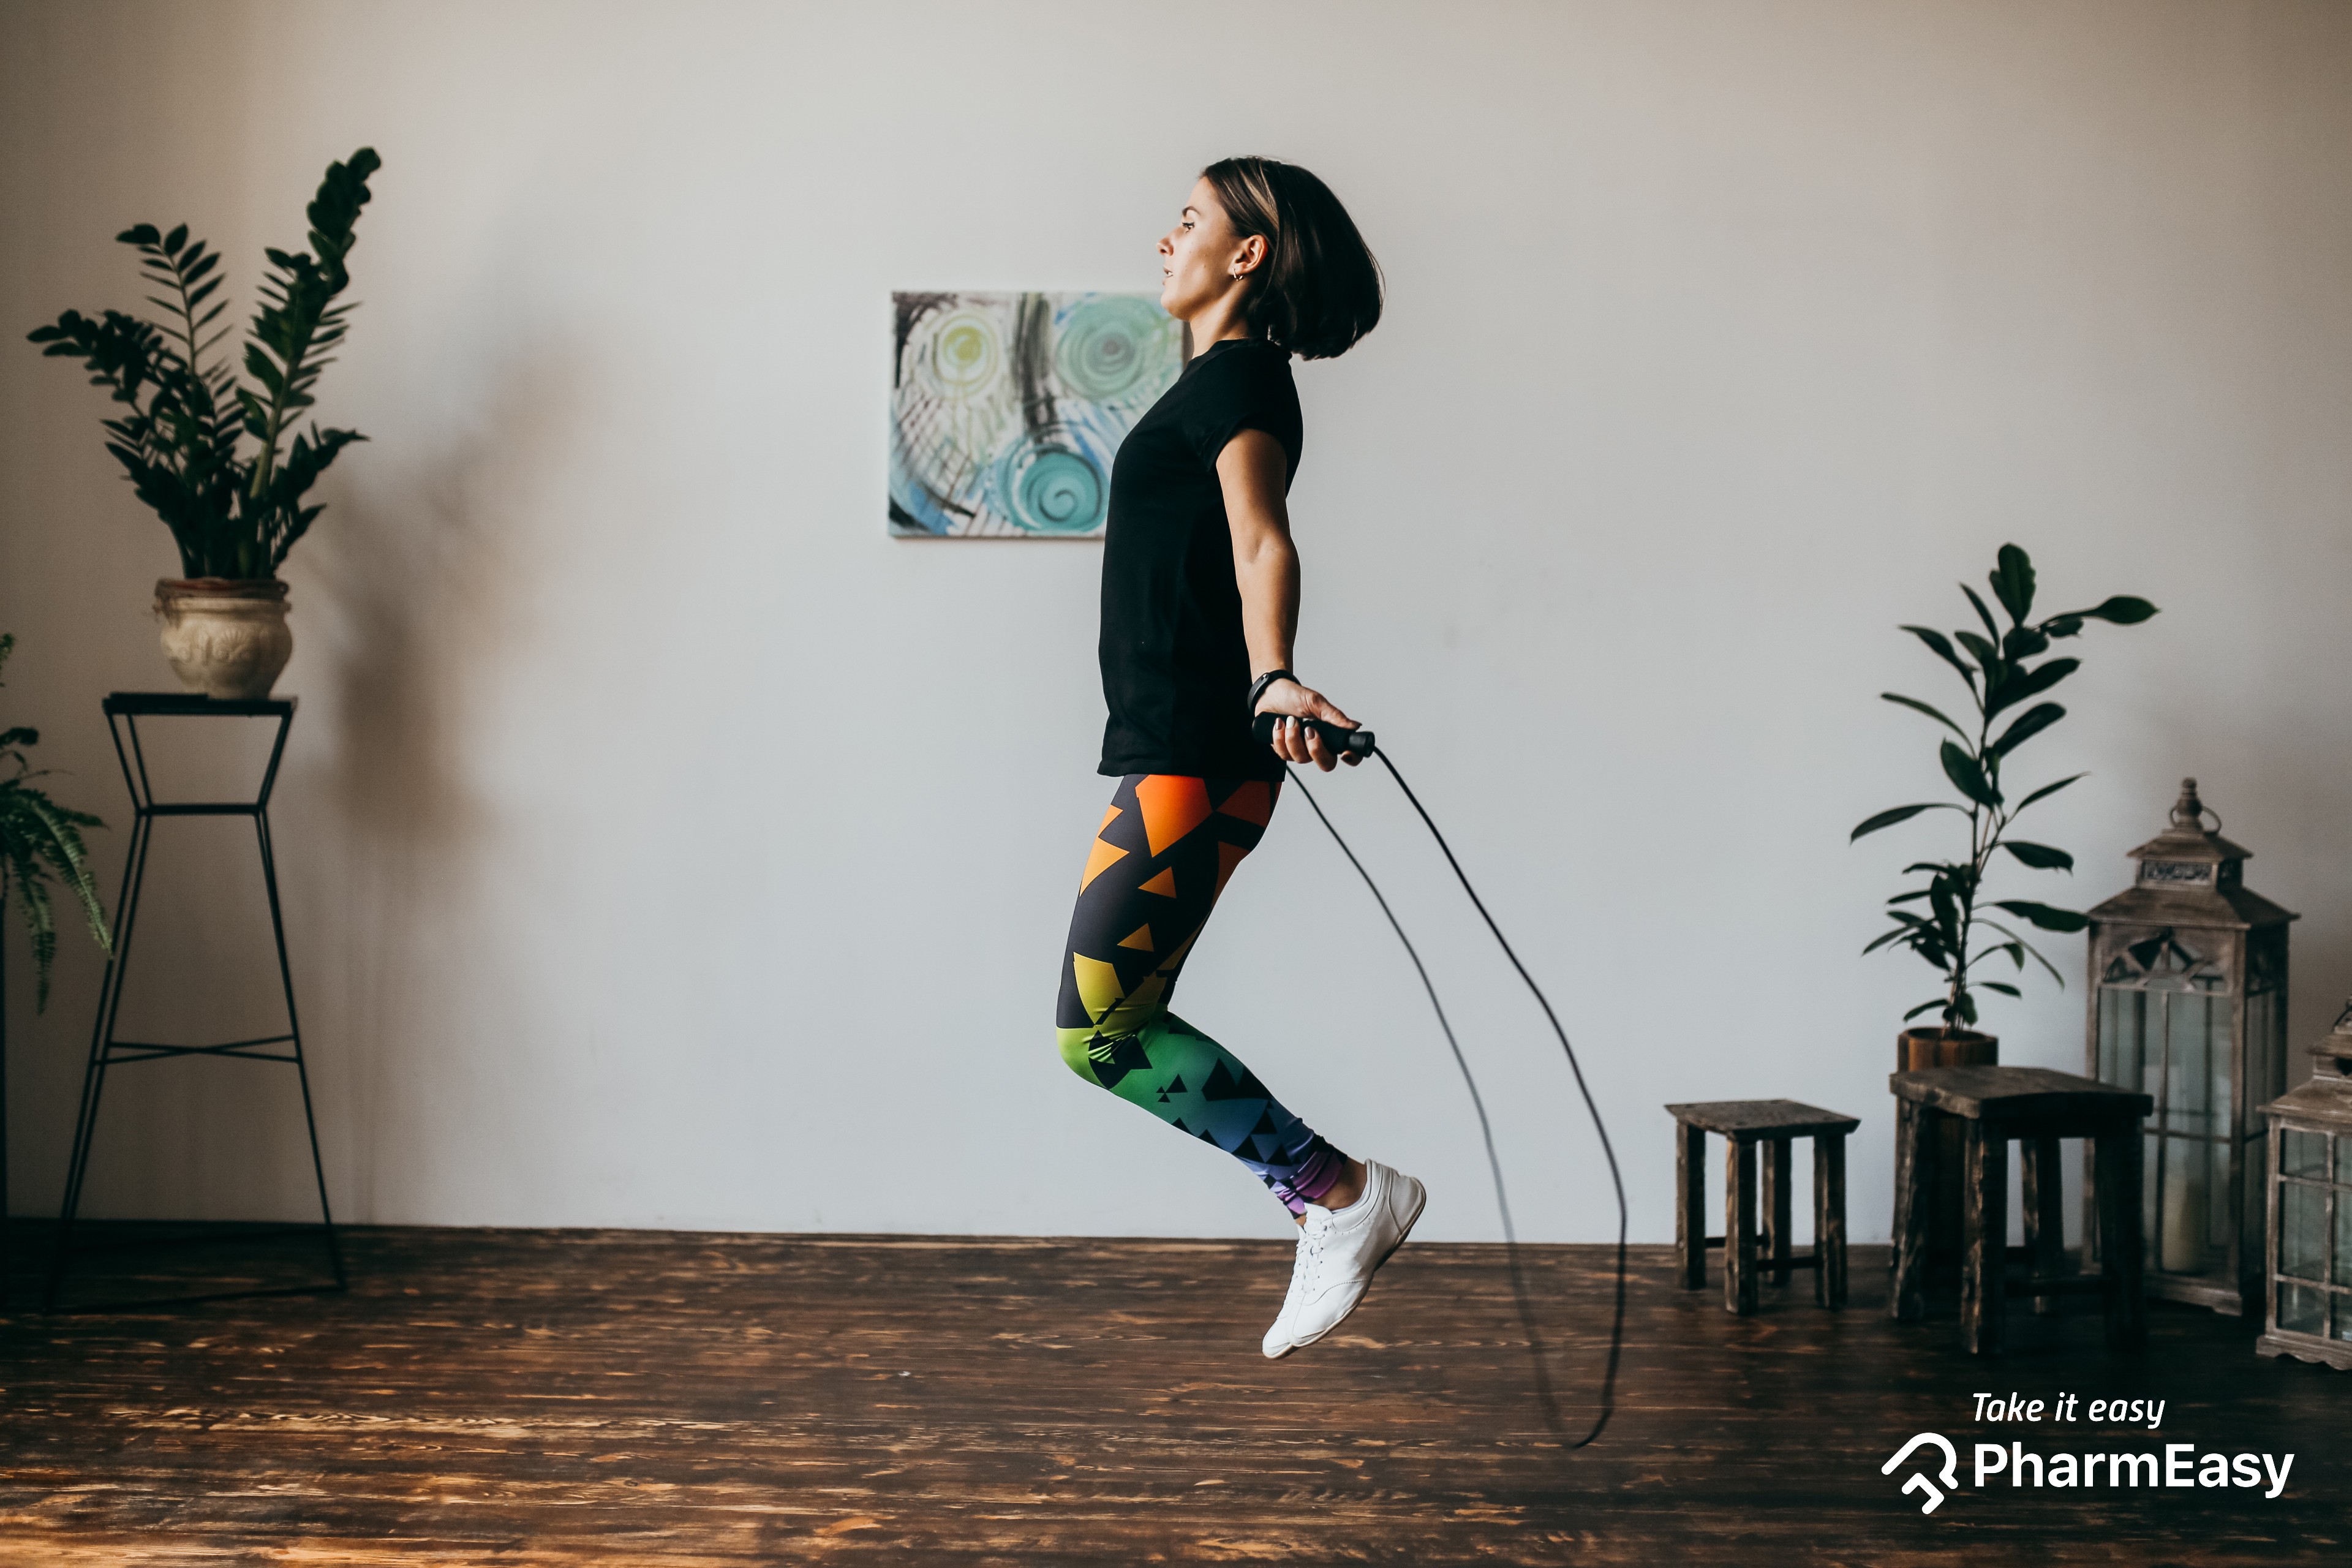 Jump Rope Cardio: The Benefits of Jumping Rope